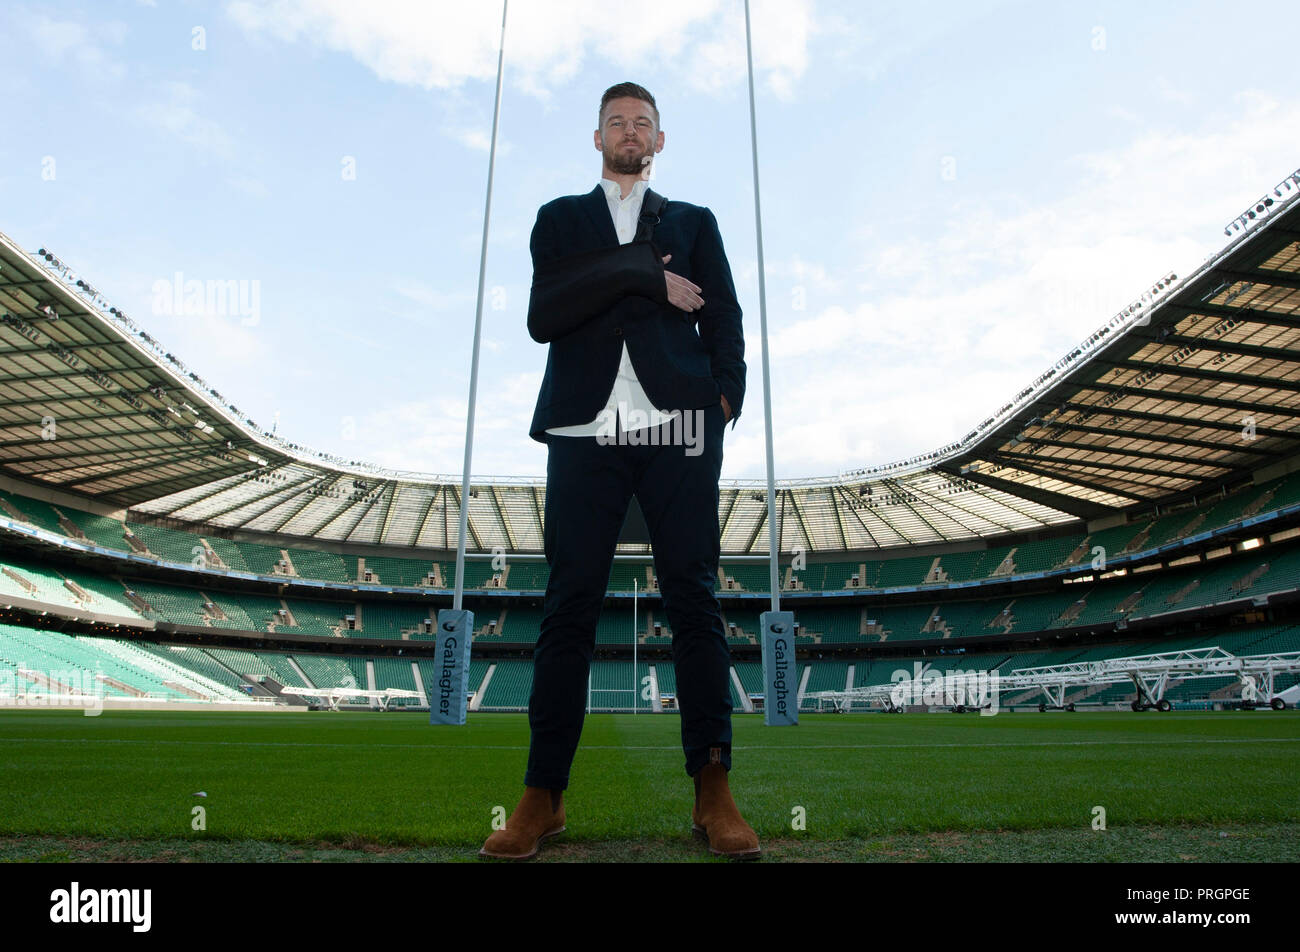 Twickenham, UK. 2nd October 2018. Former Northampton Saints and Wallabies centre, Rob Horne, who retired through injury, poses for photos to promote the Northampton Saints v Leicester Tigers Gallagher Premiership round 6 match at Twickenham Stadium, London, UK. Andrew Taylor/Alamy Live News Stock Photo